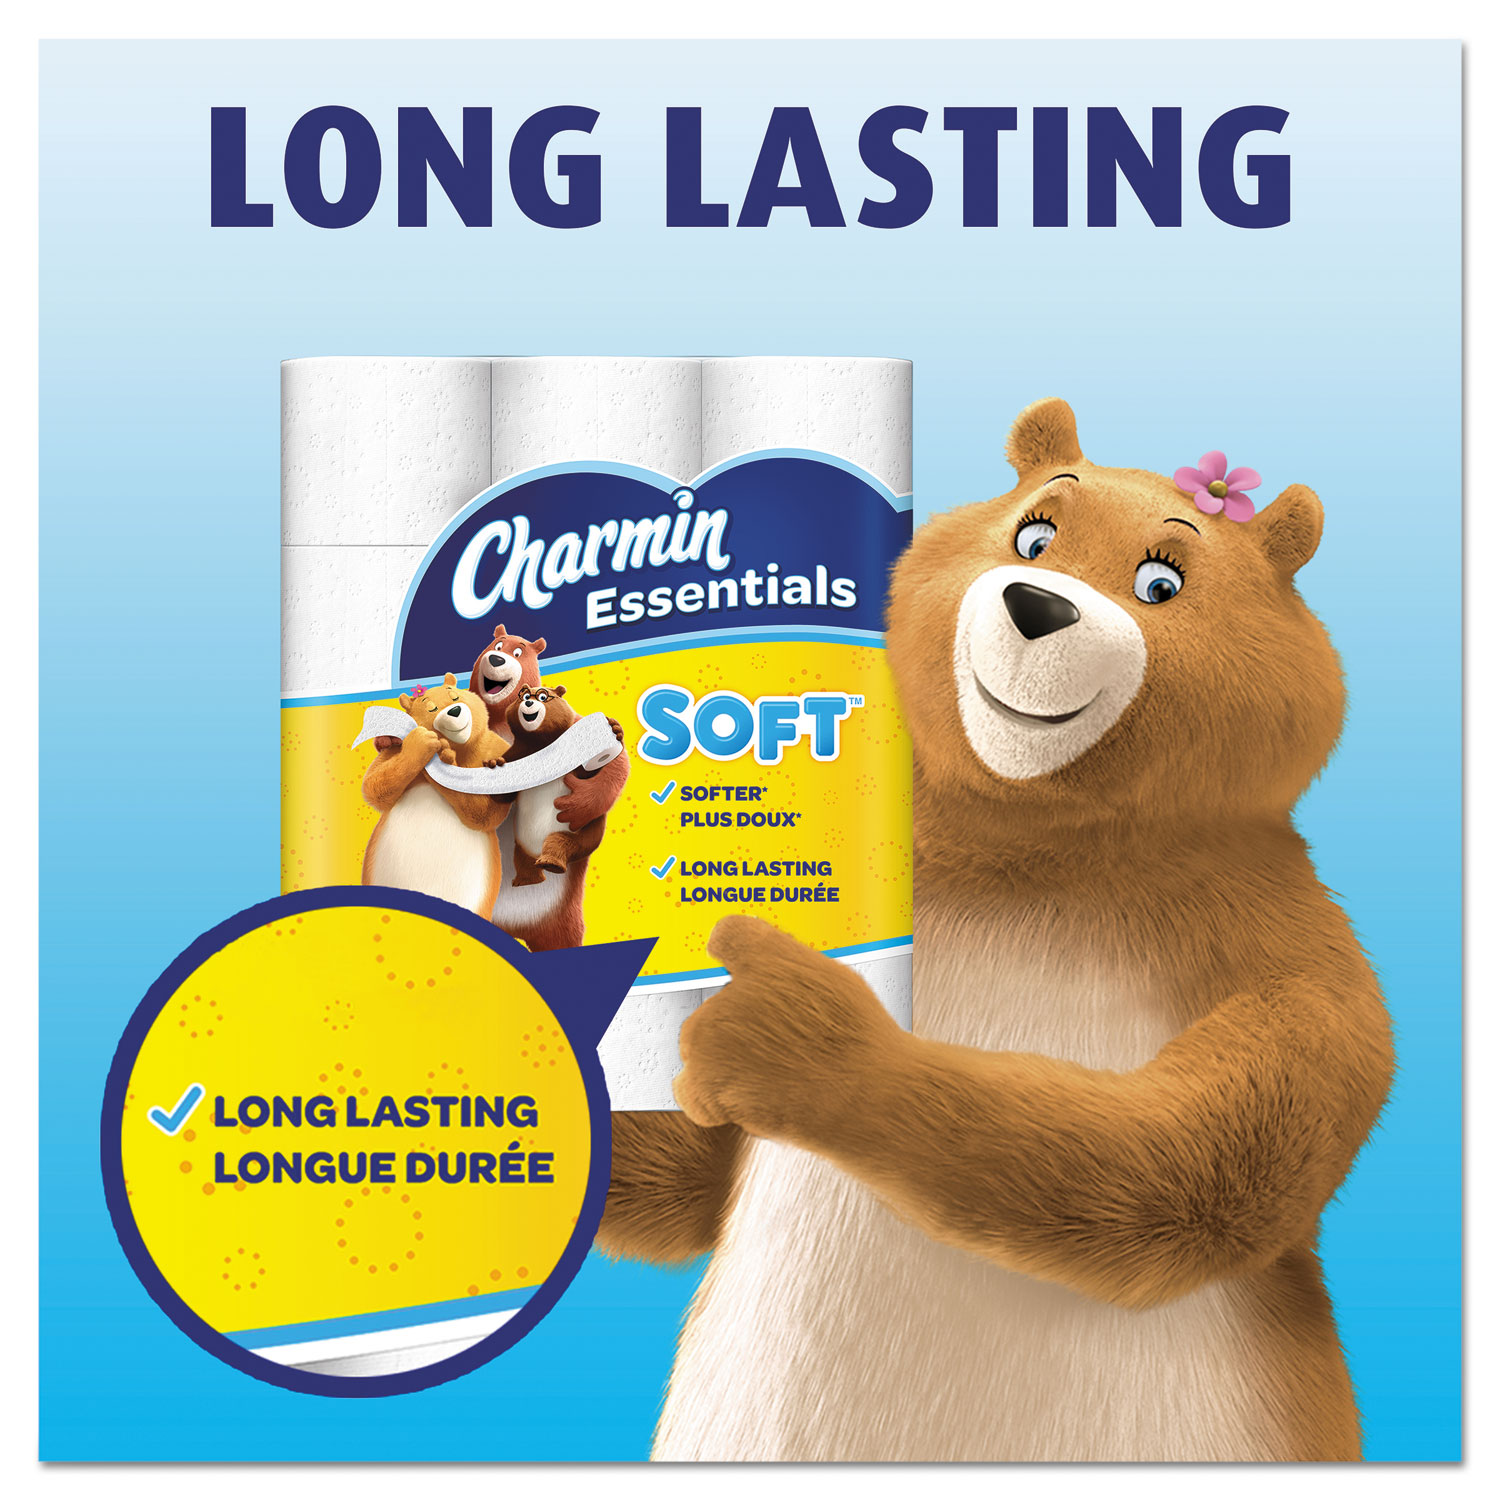 Charmin Essentials Soft Bathroom Tissue, 2-Ply, 4 x 3.92, 200/Roll, 16 Roll/Pack - image 3 of 5